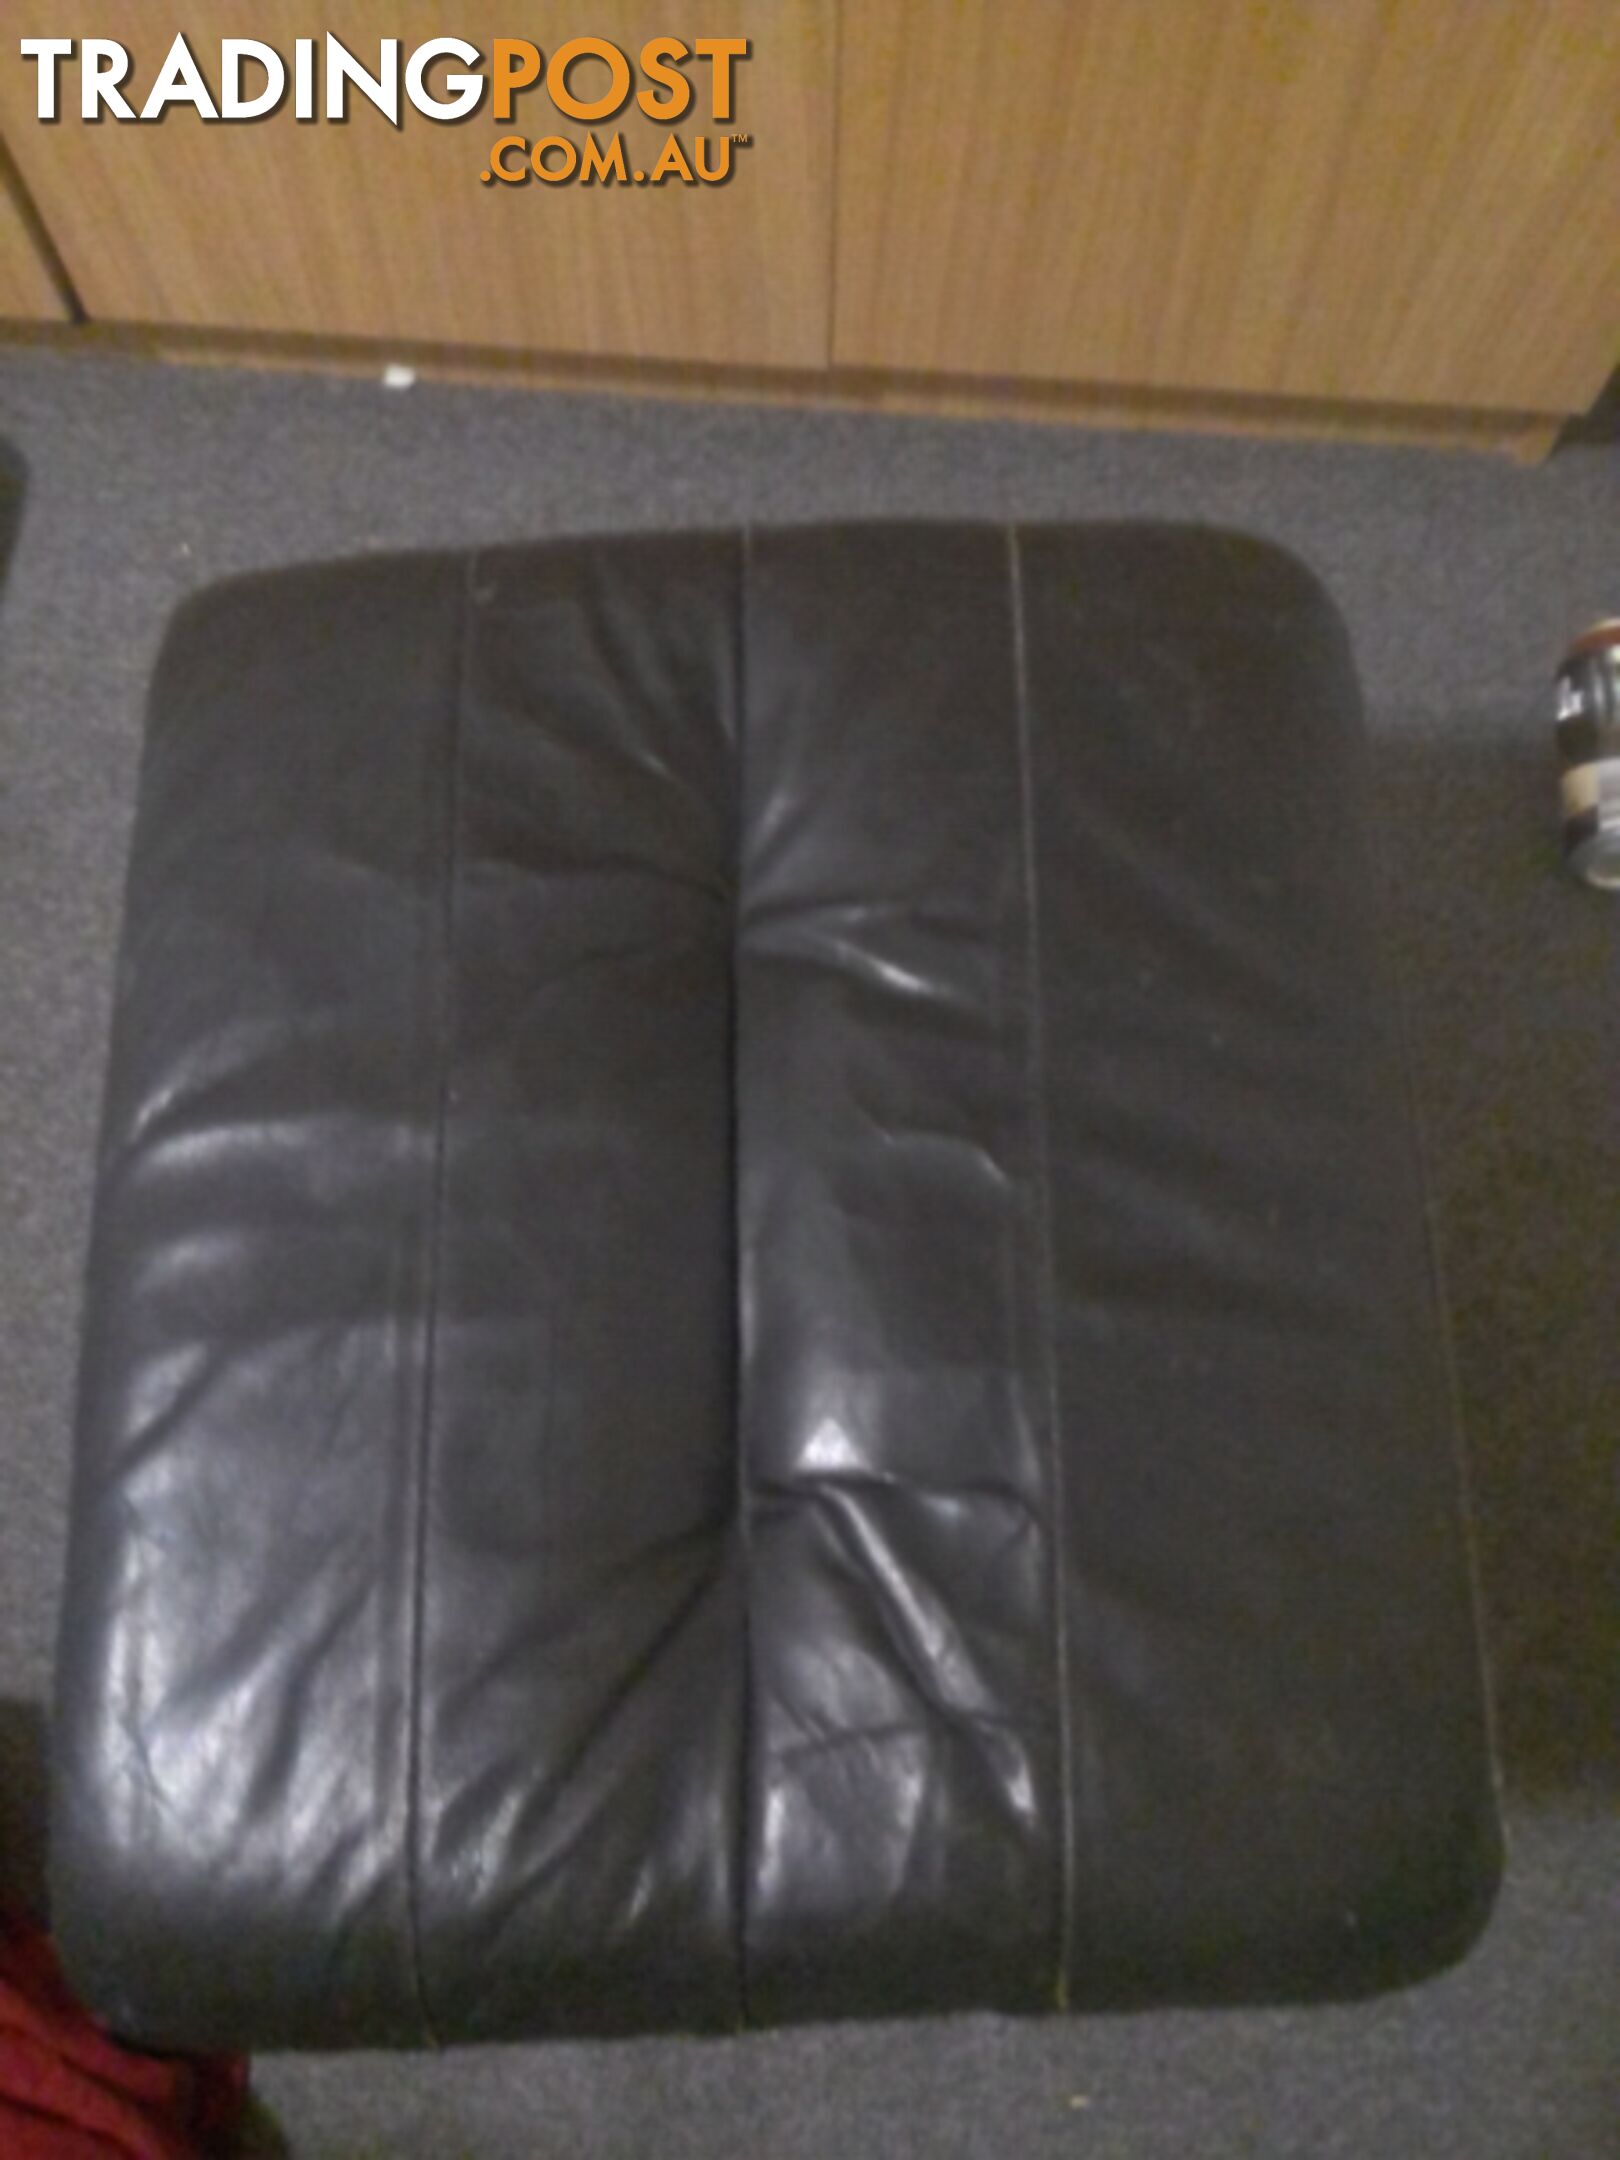 Leather foot rest steal frame. excellent condition $25ono